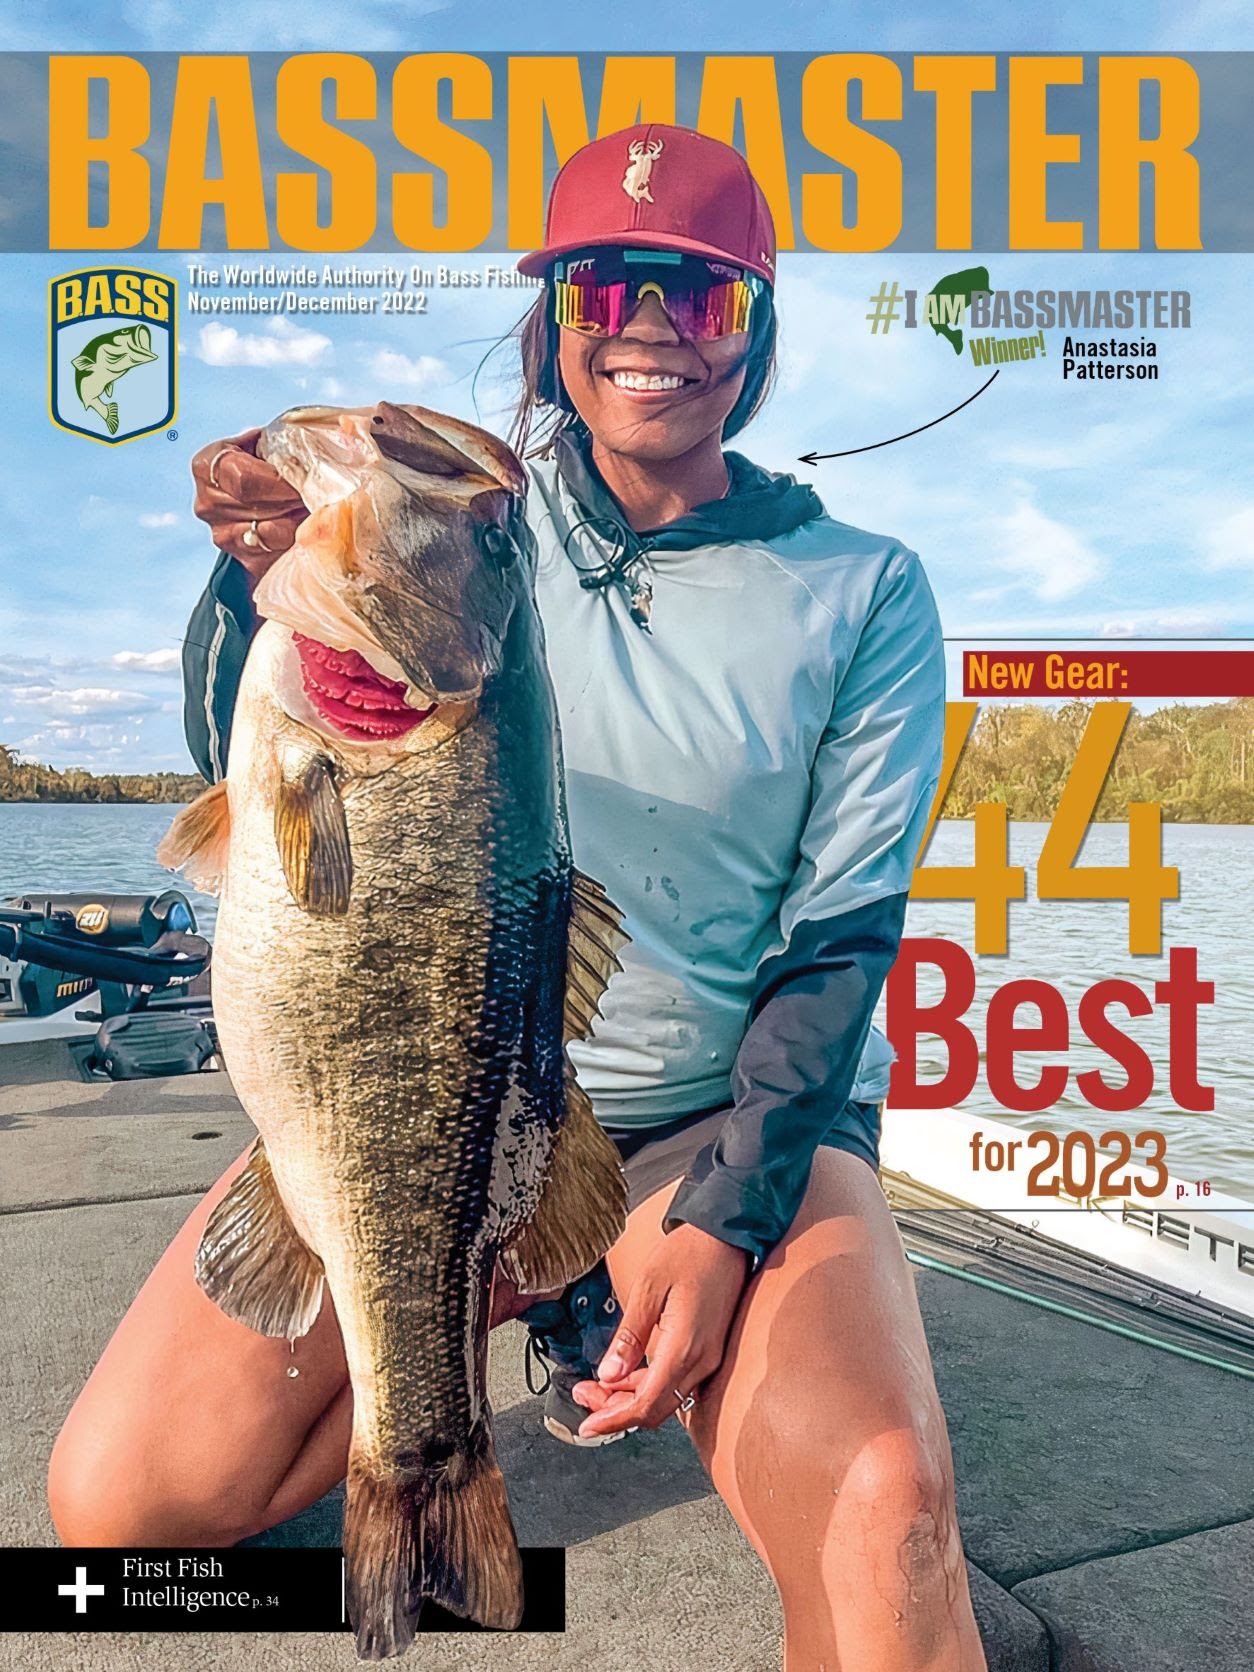 “I Am Bassmaster” Cover Honors Anastasia Patterson’s Passion For Sportfishing